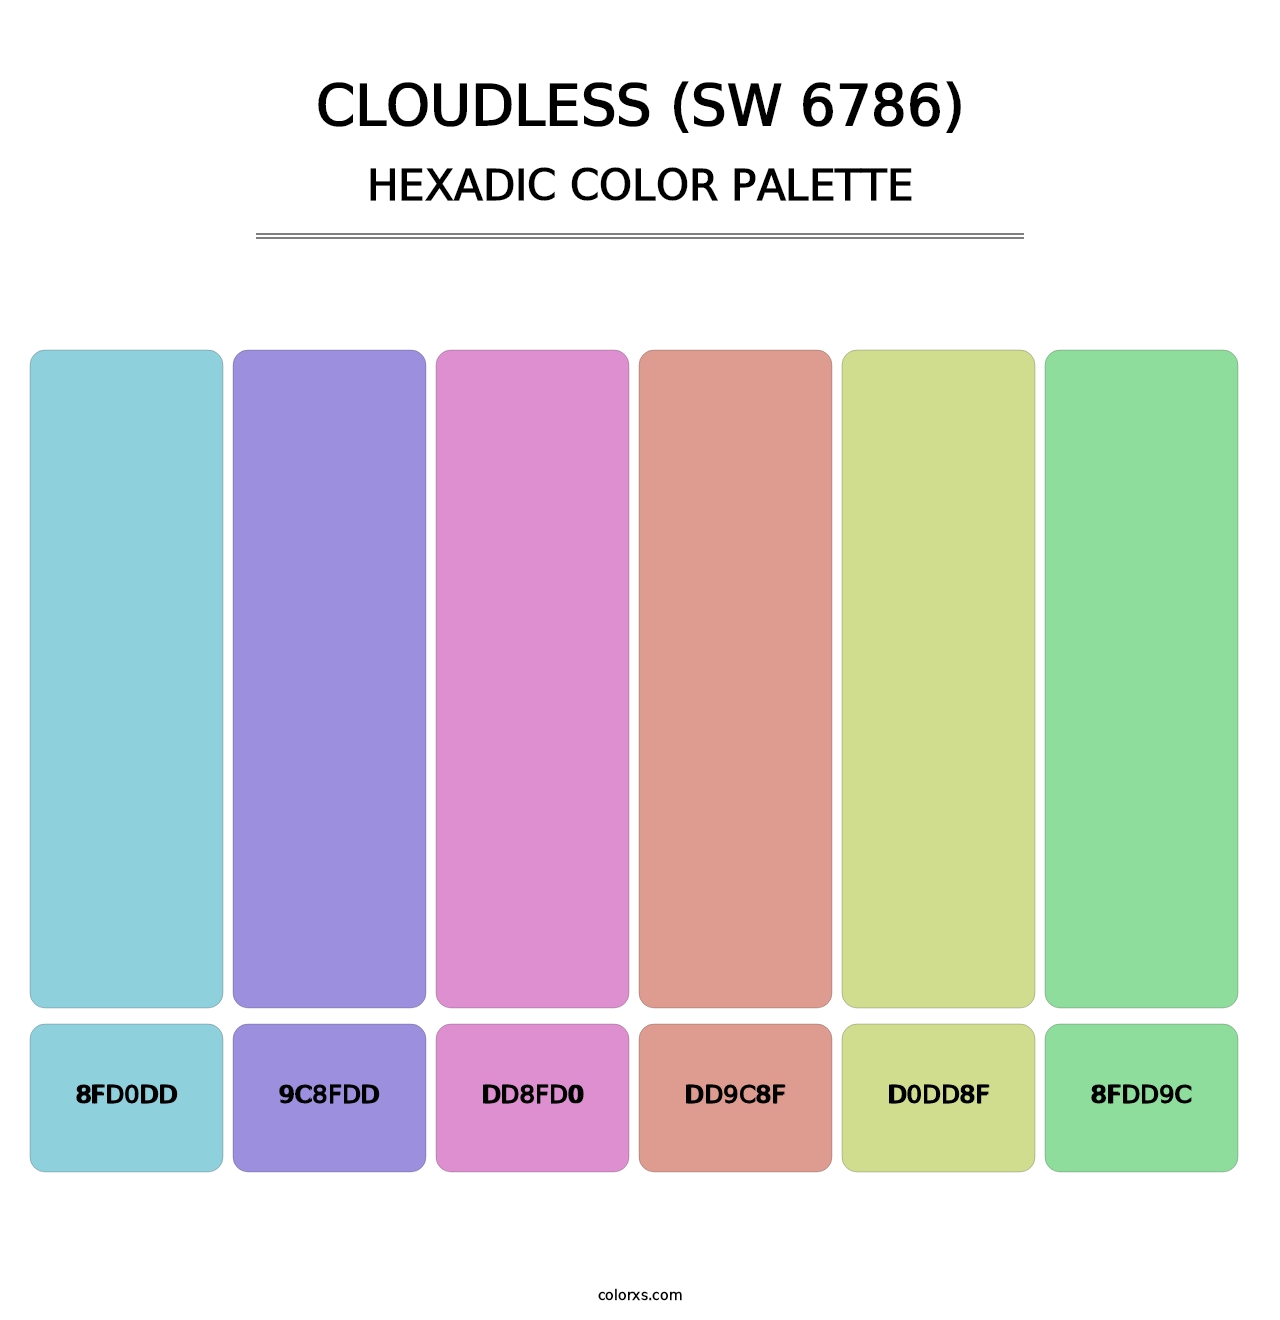 Cloudless (SW 6786) - Hexadic Color Palette